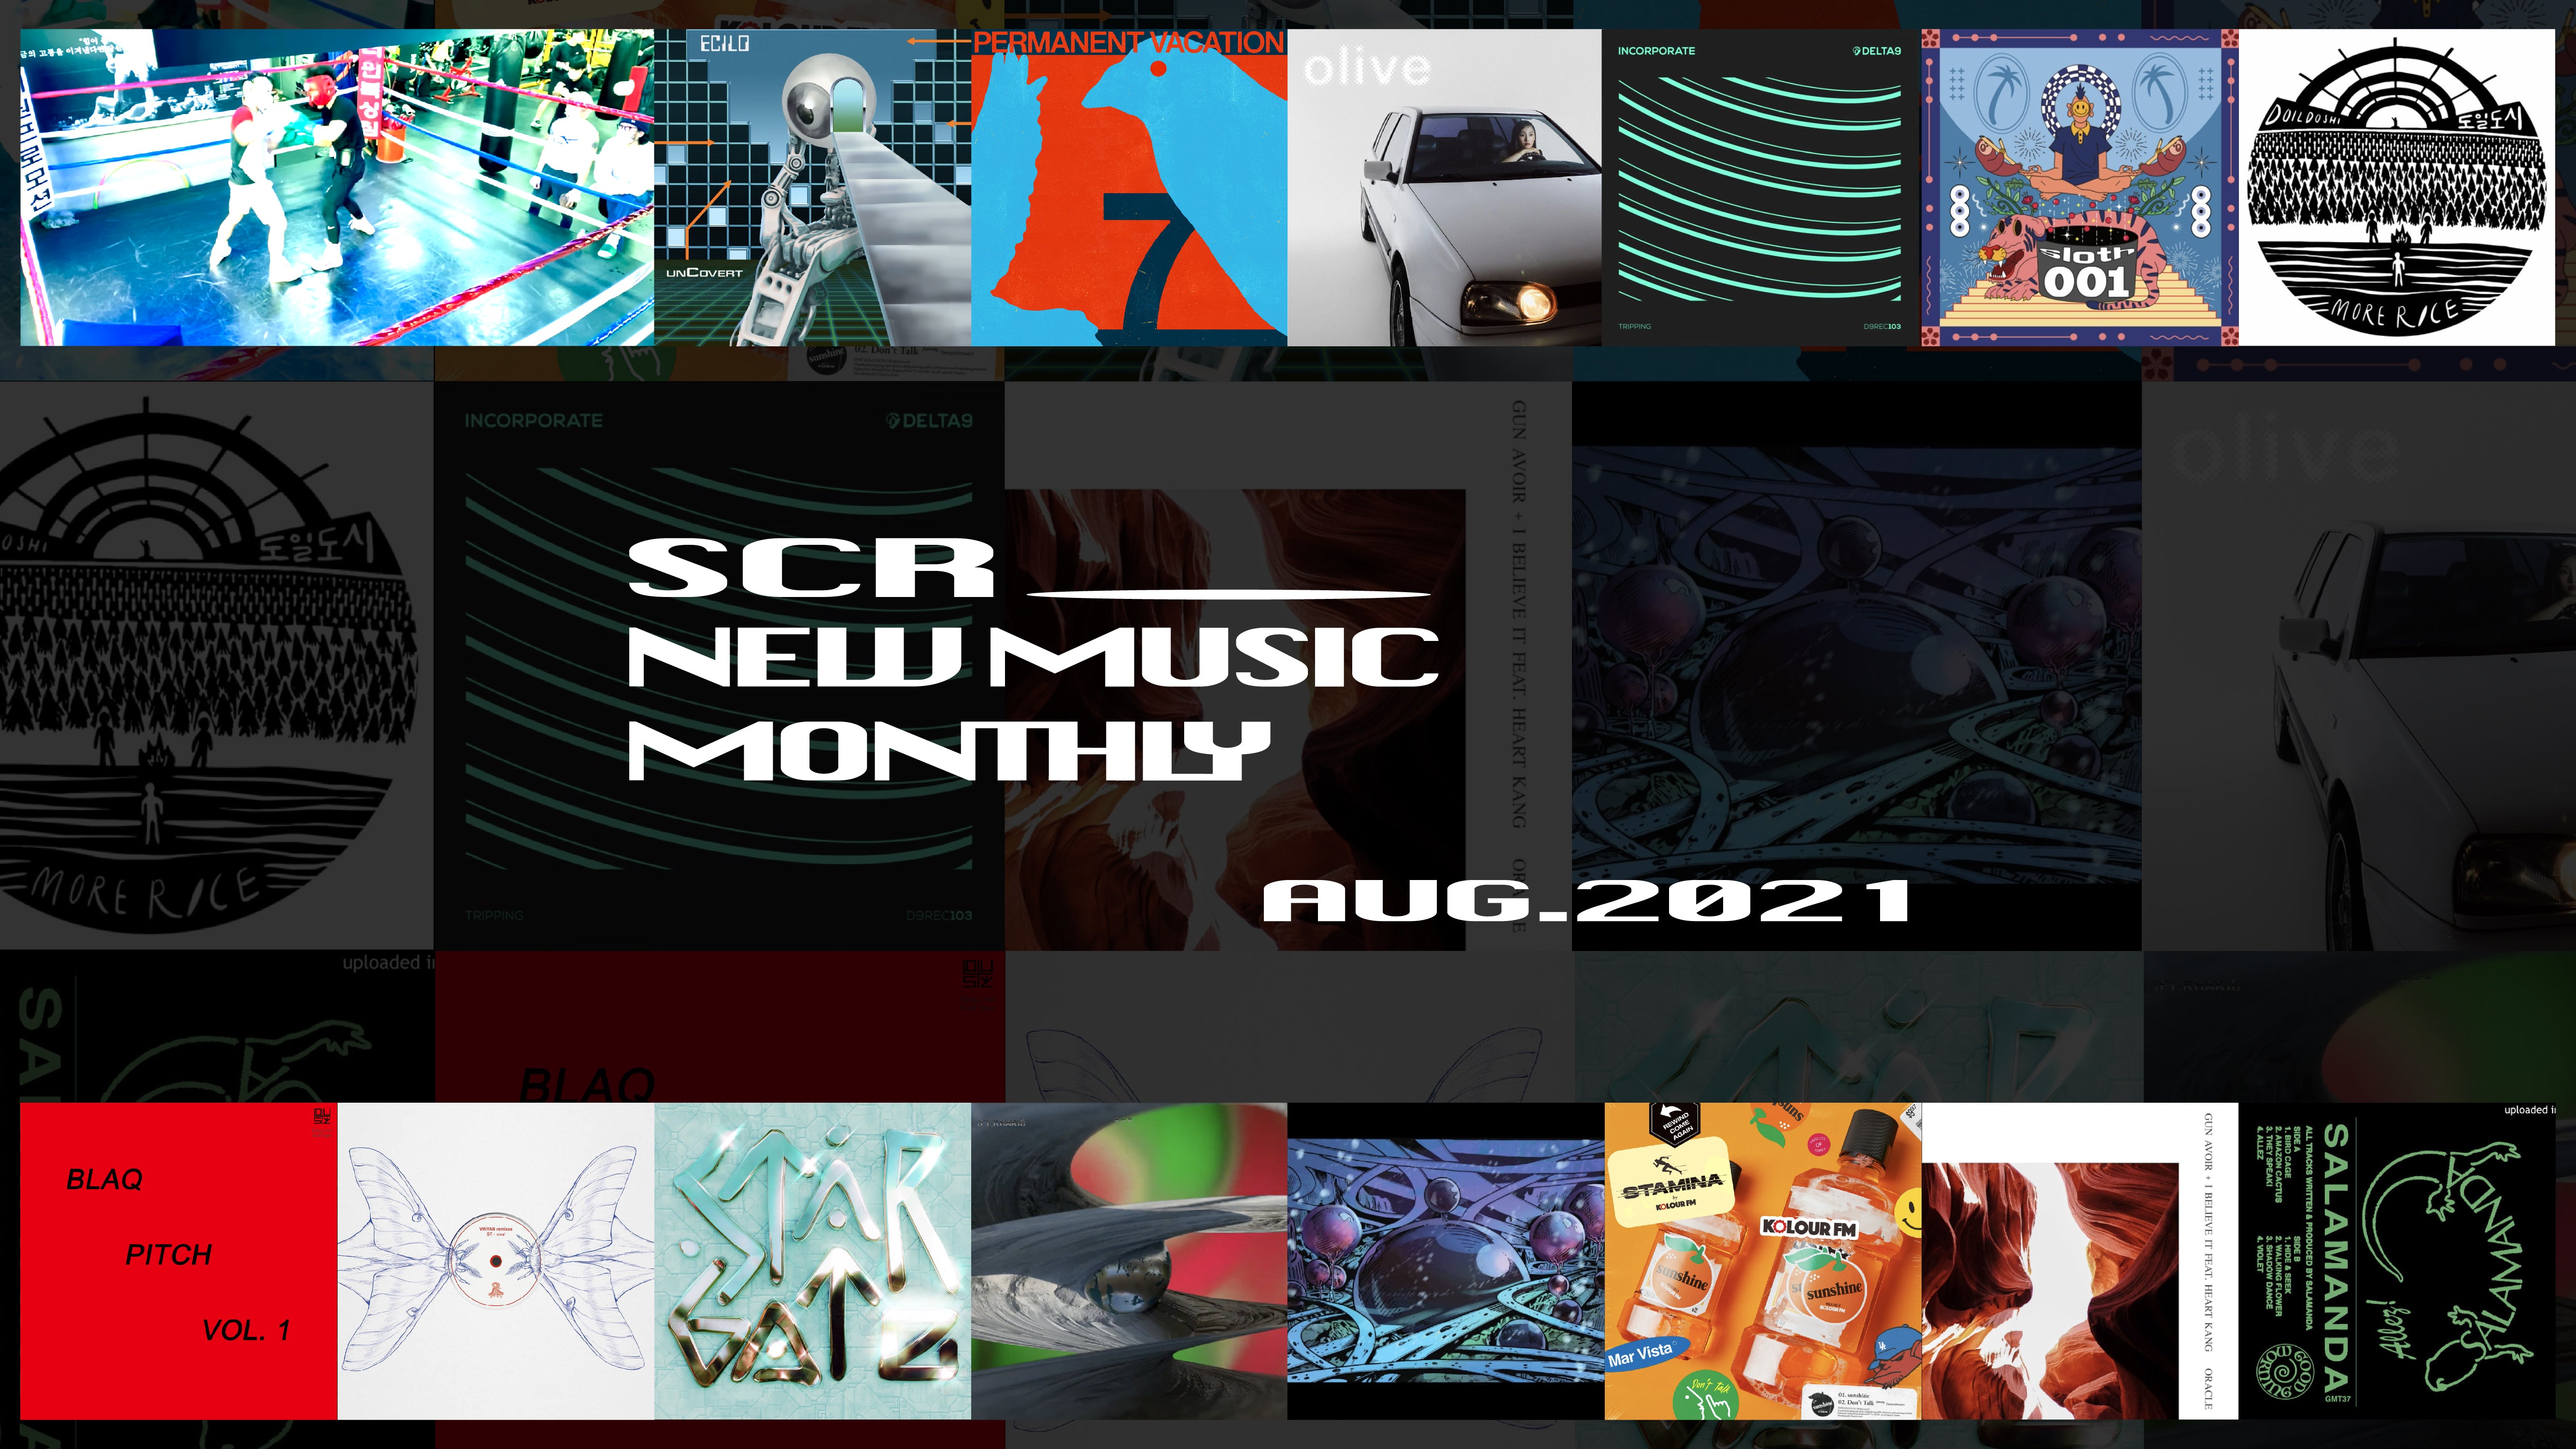 August 2021 by Music Connection - Issuu